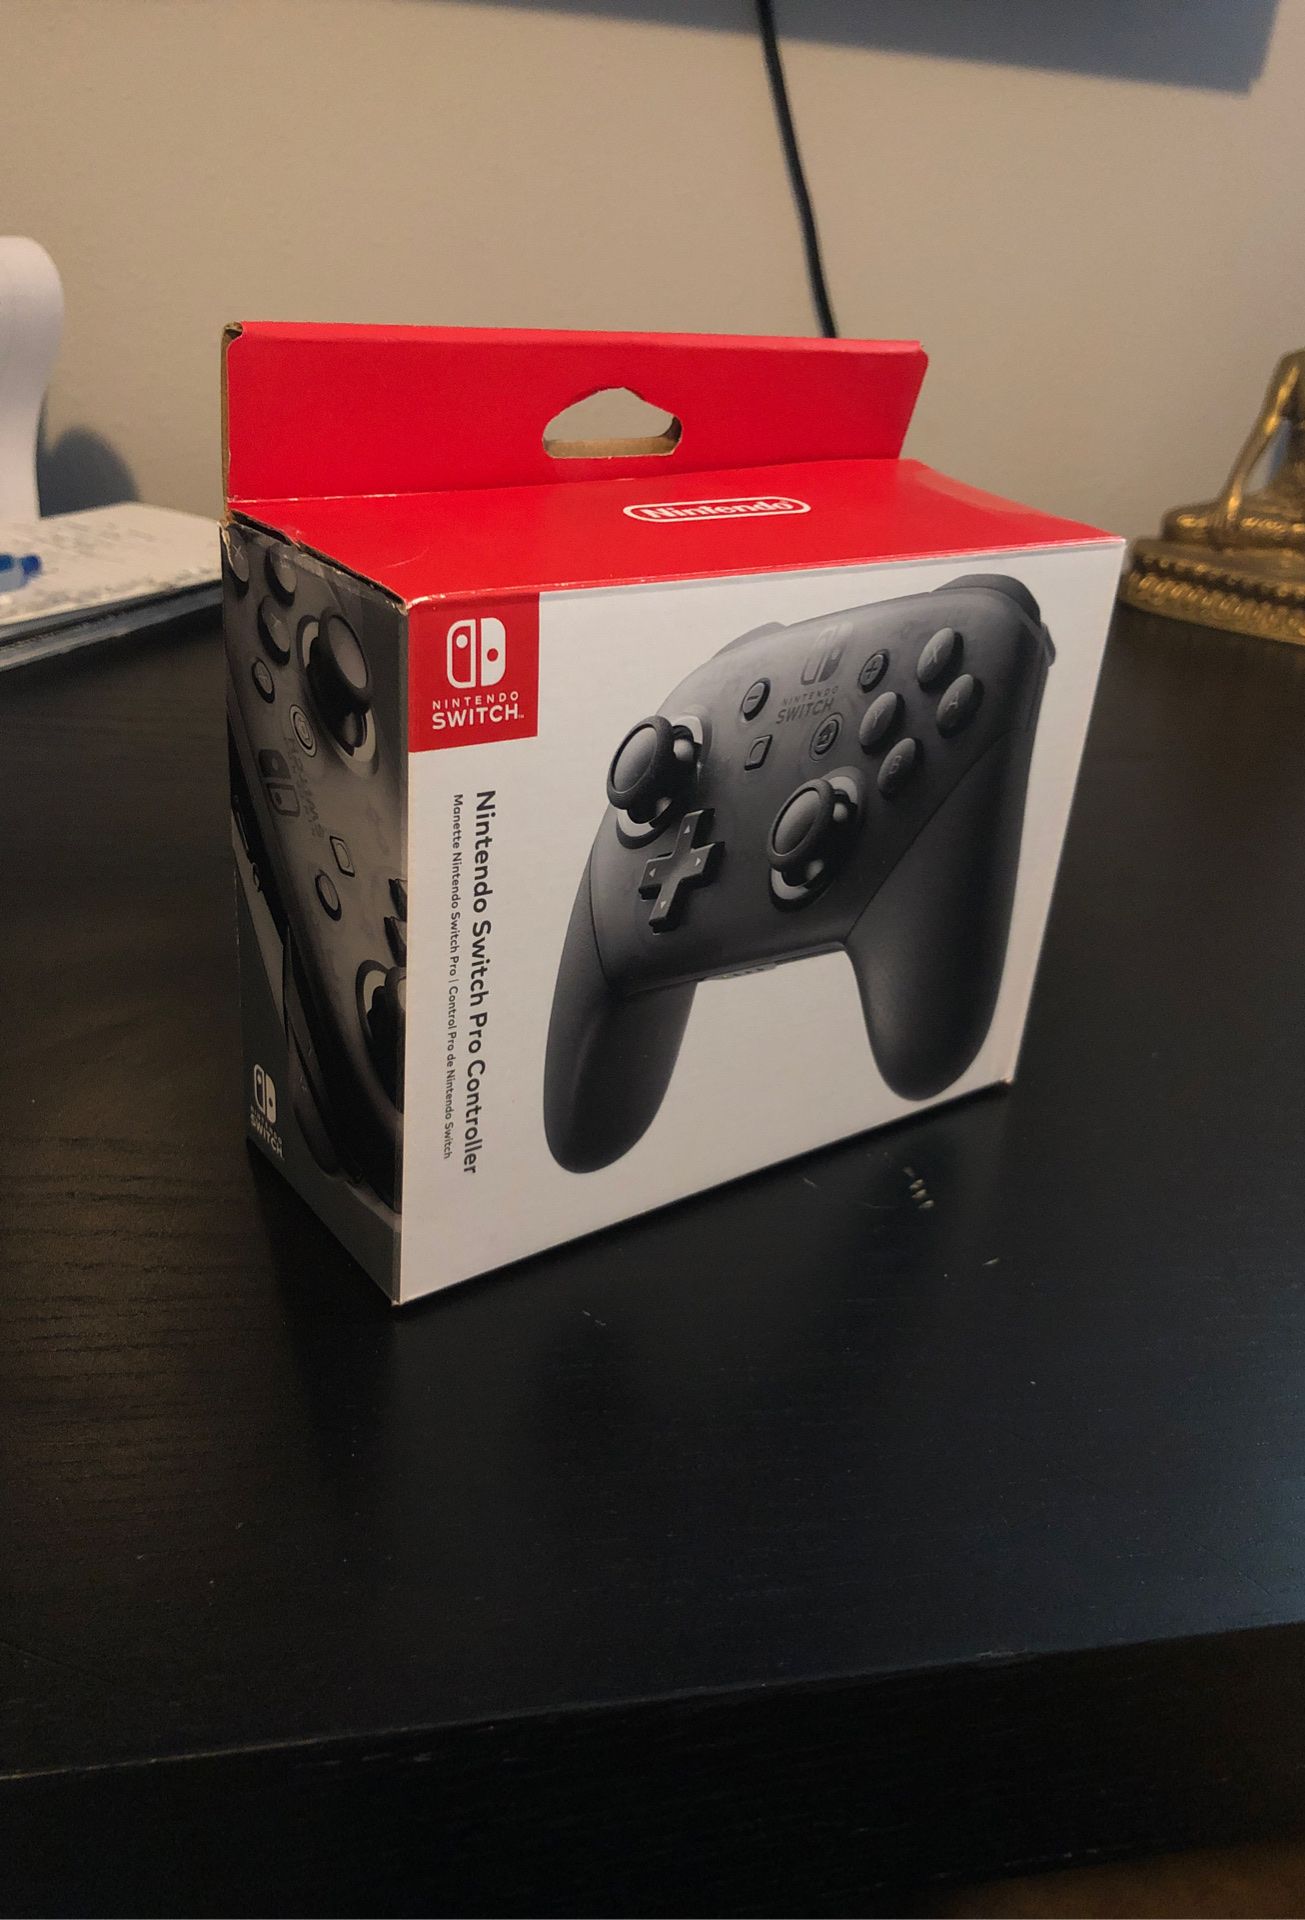 Used once Nintendo switch Pro Controller